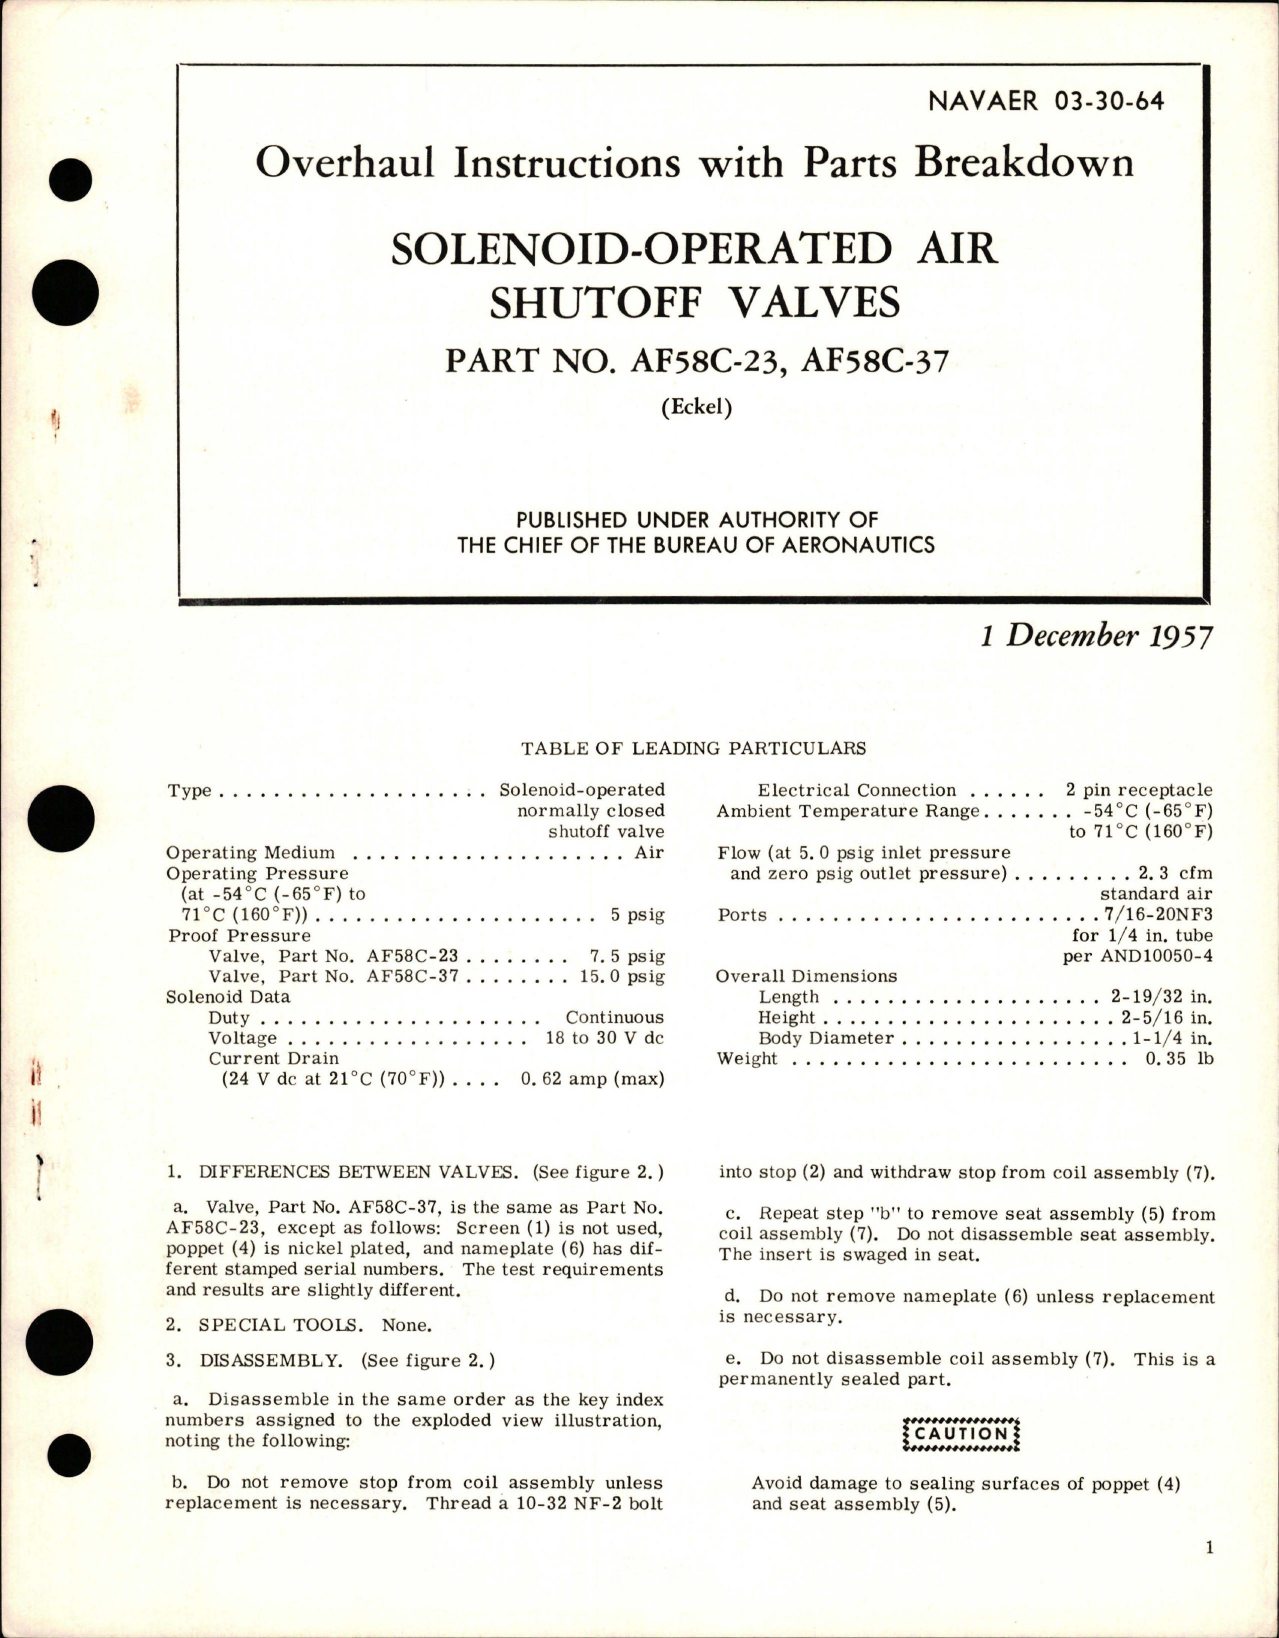 Sample page 1 from AirCorps Library document: Overhaul Instructions with Parts Breakdown for Solenoid-Operated Air Shutoff Valves - Parts AF58C-23 and AF58C-37 